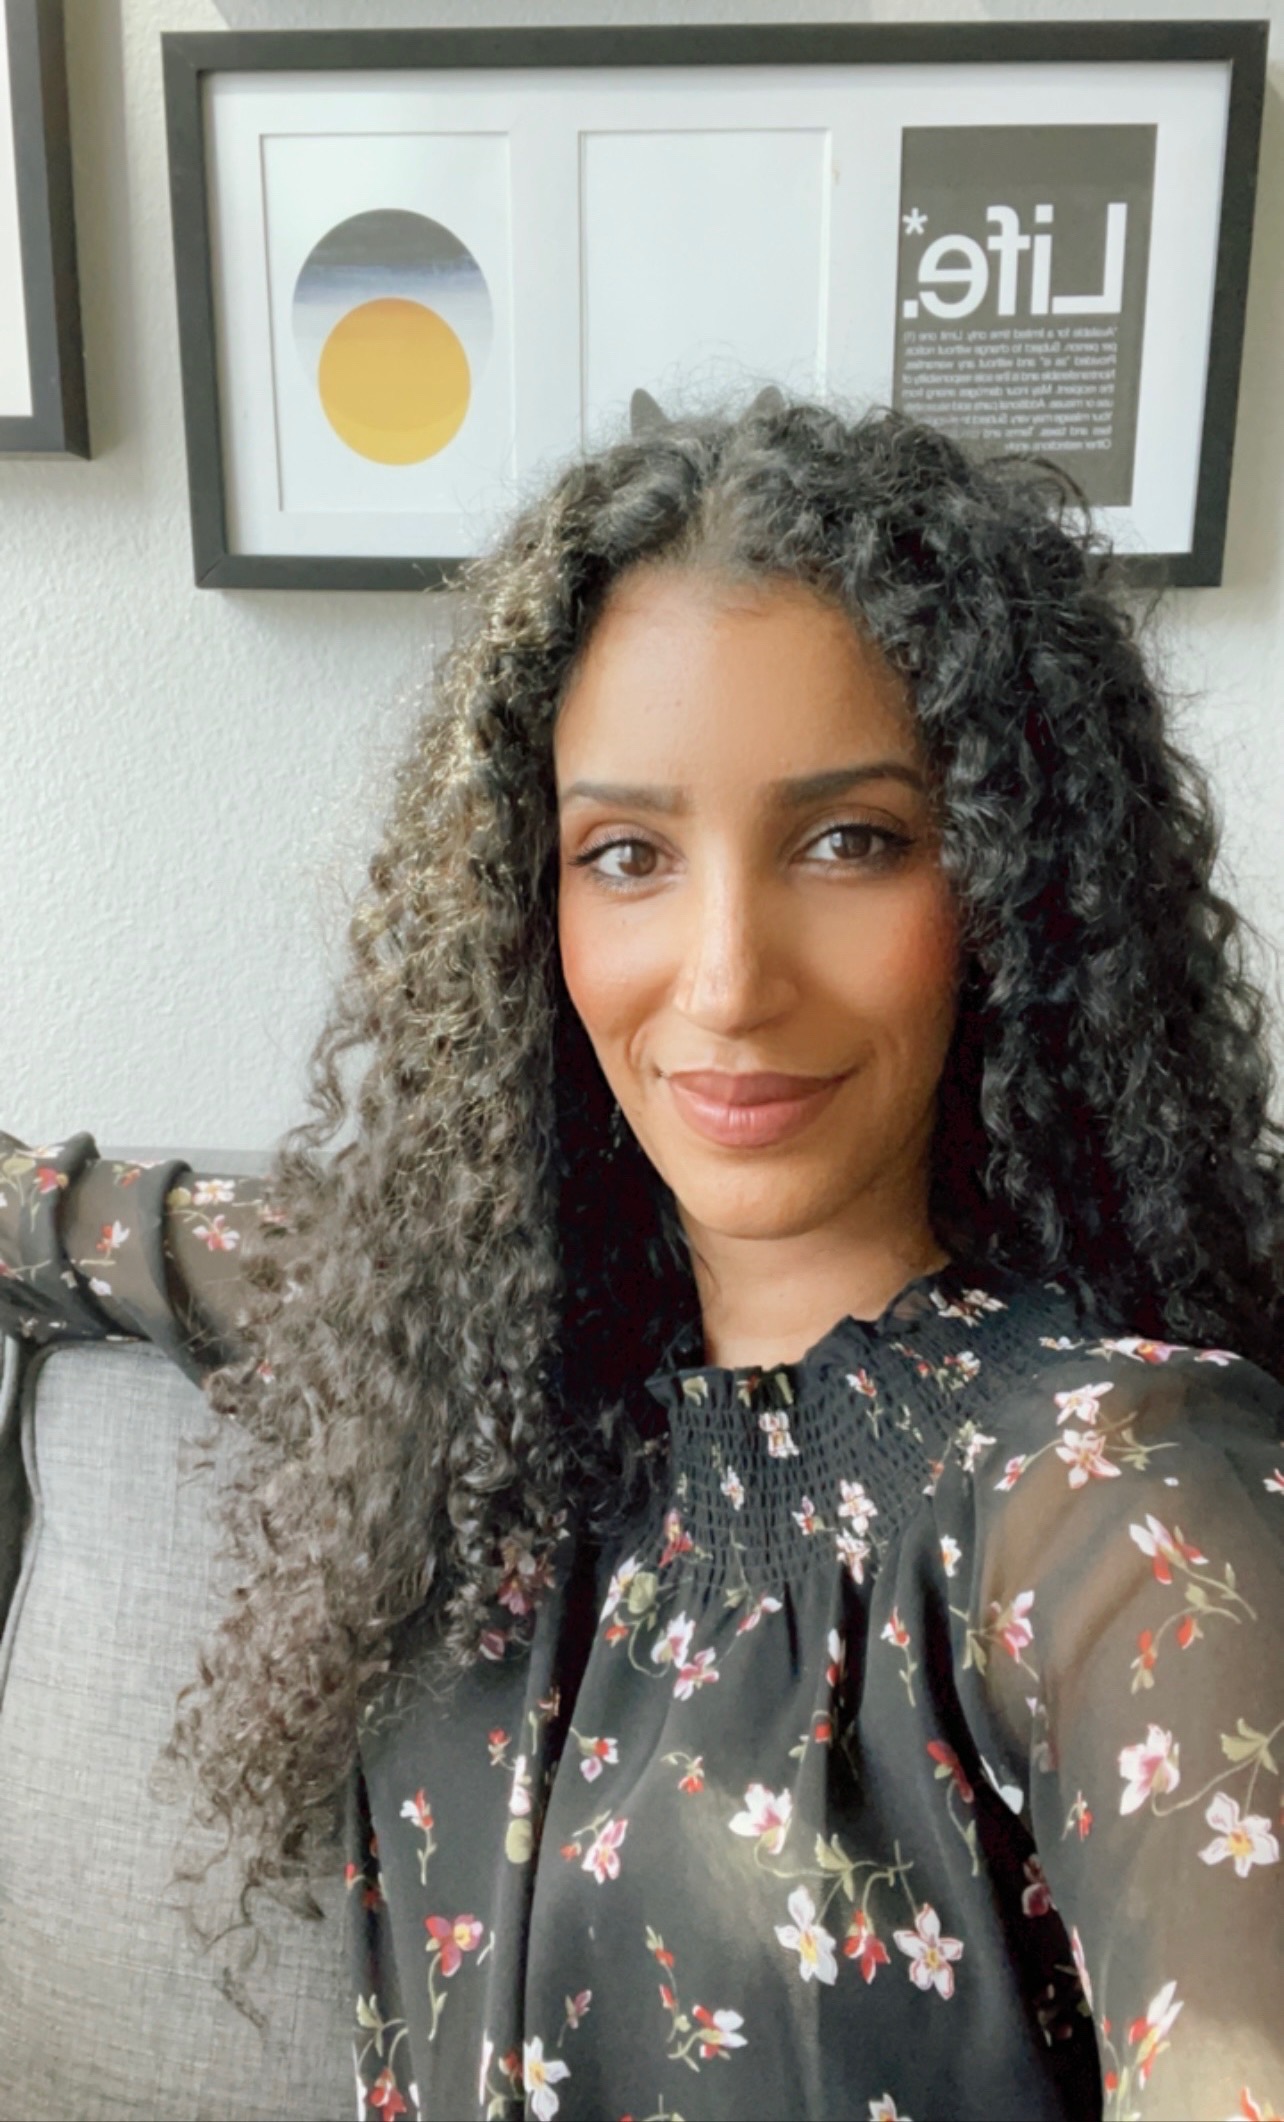 A medium-skinned woman with long, black curly hair takes a selfie while sitting on a couch. A framed artwork is visible behind her. She smiles warmly.